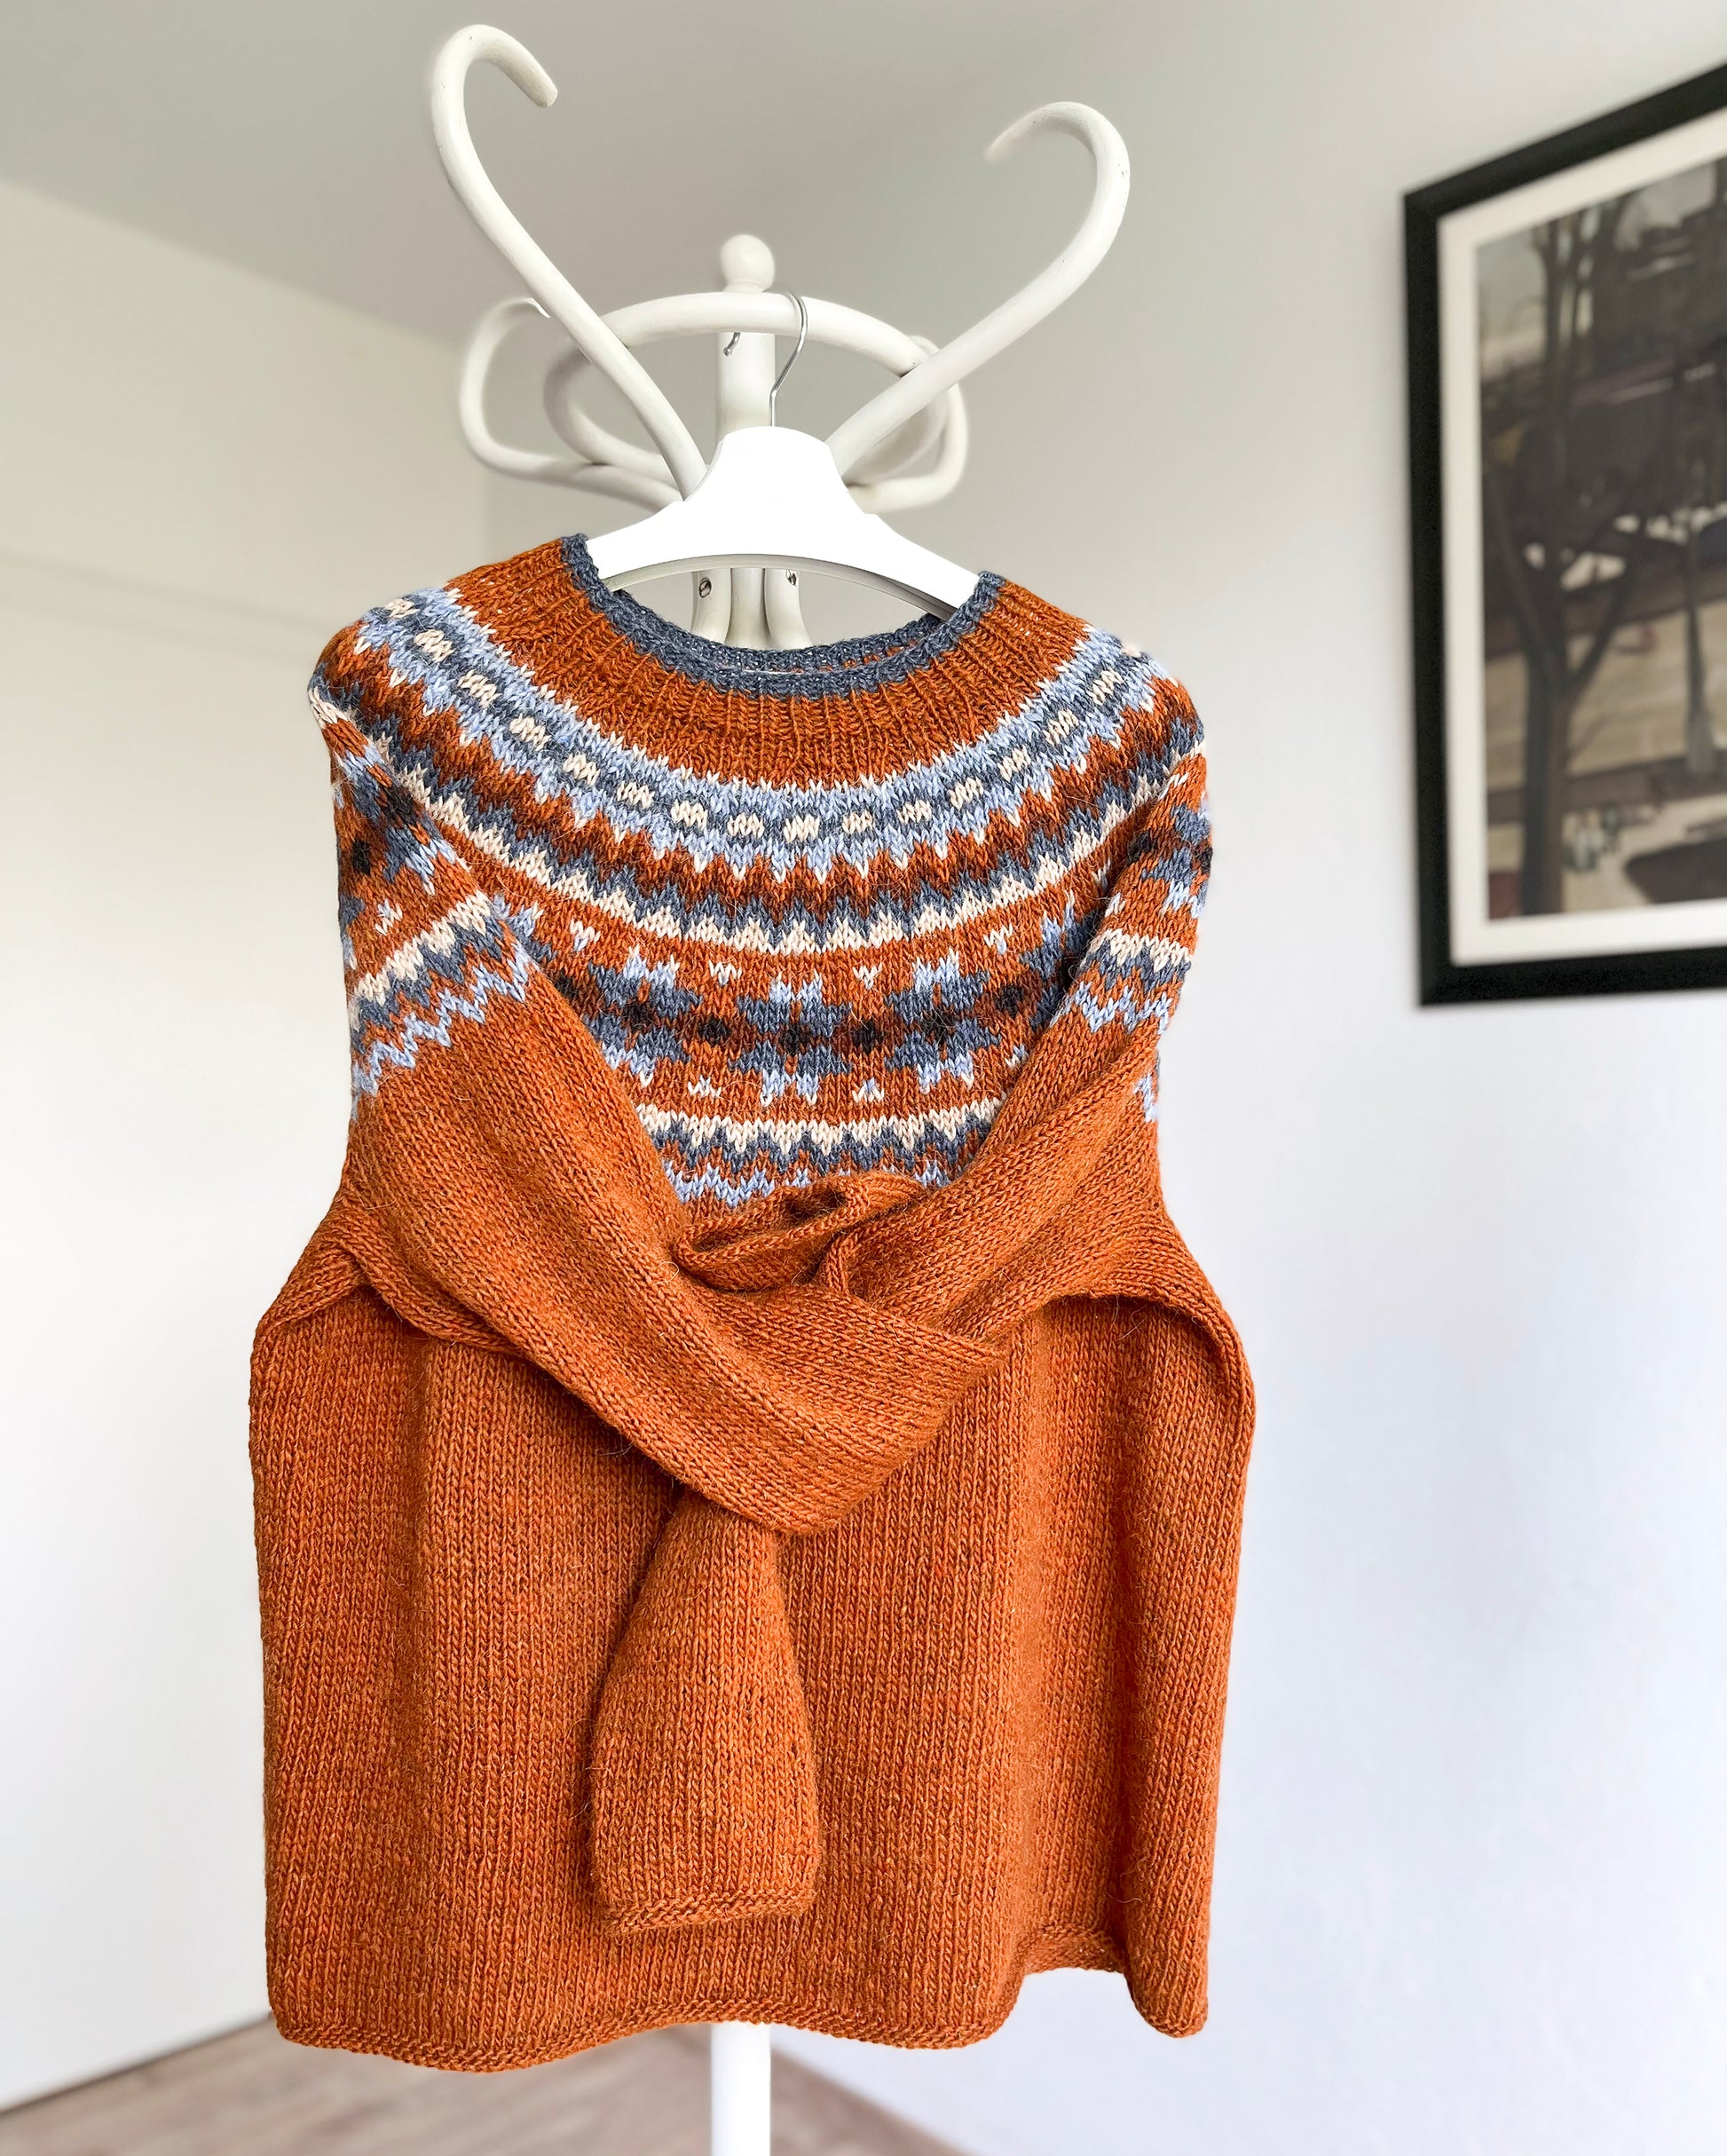 Orange and blue Icelandic lopapeysa knitted sweater from Lettlopi pure Icelandic wool in Rósir design